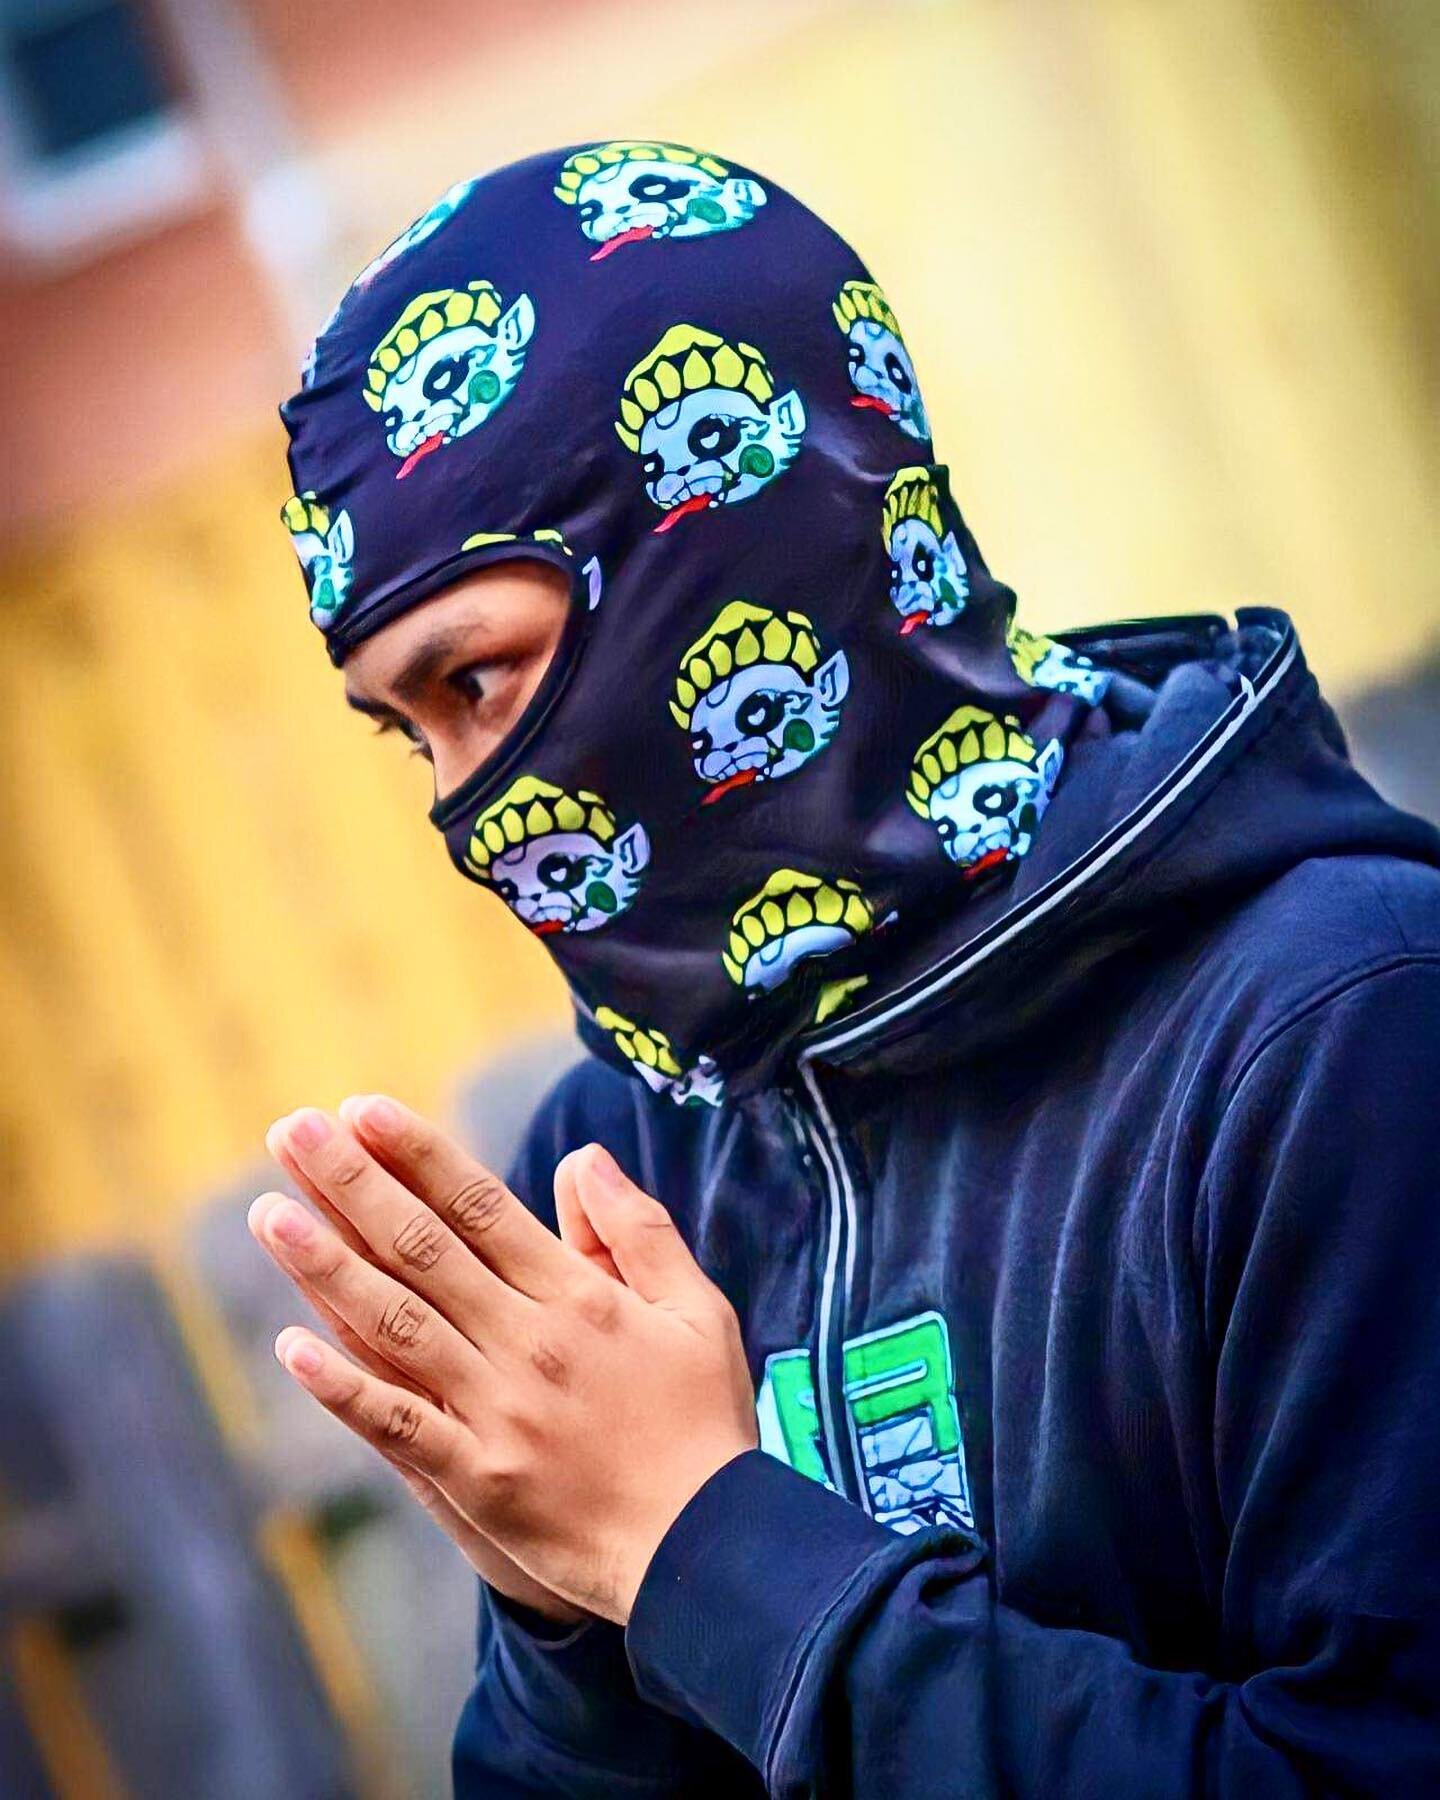 Out CNY x LZP 🥷 masks will be available during Cambodian new year weekend! FCFS! #mask #poohshiesty #art #khmer #cambodian #fashion #supportlocal #hanuman #panda 

📷: @ceethroughlens 
Model: @_ten1o